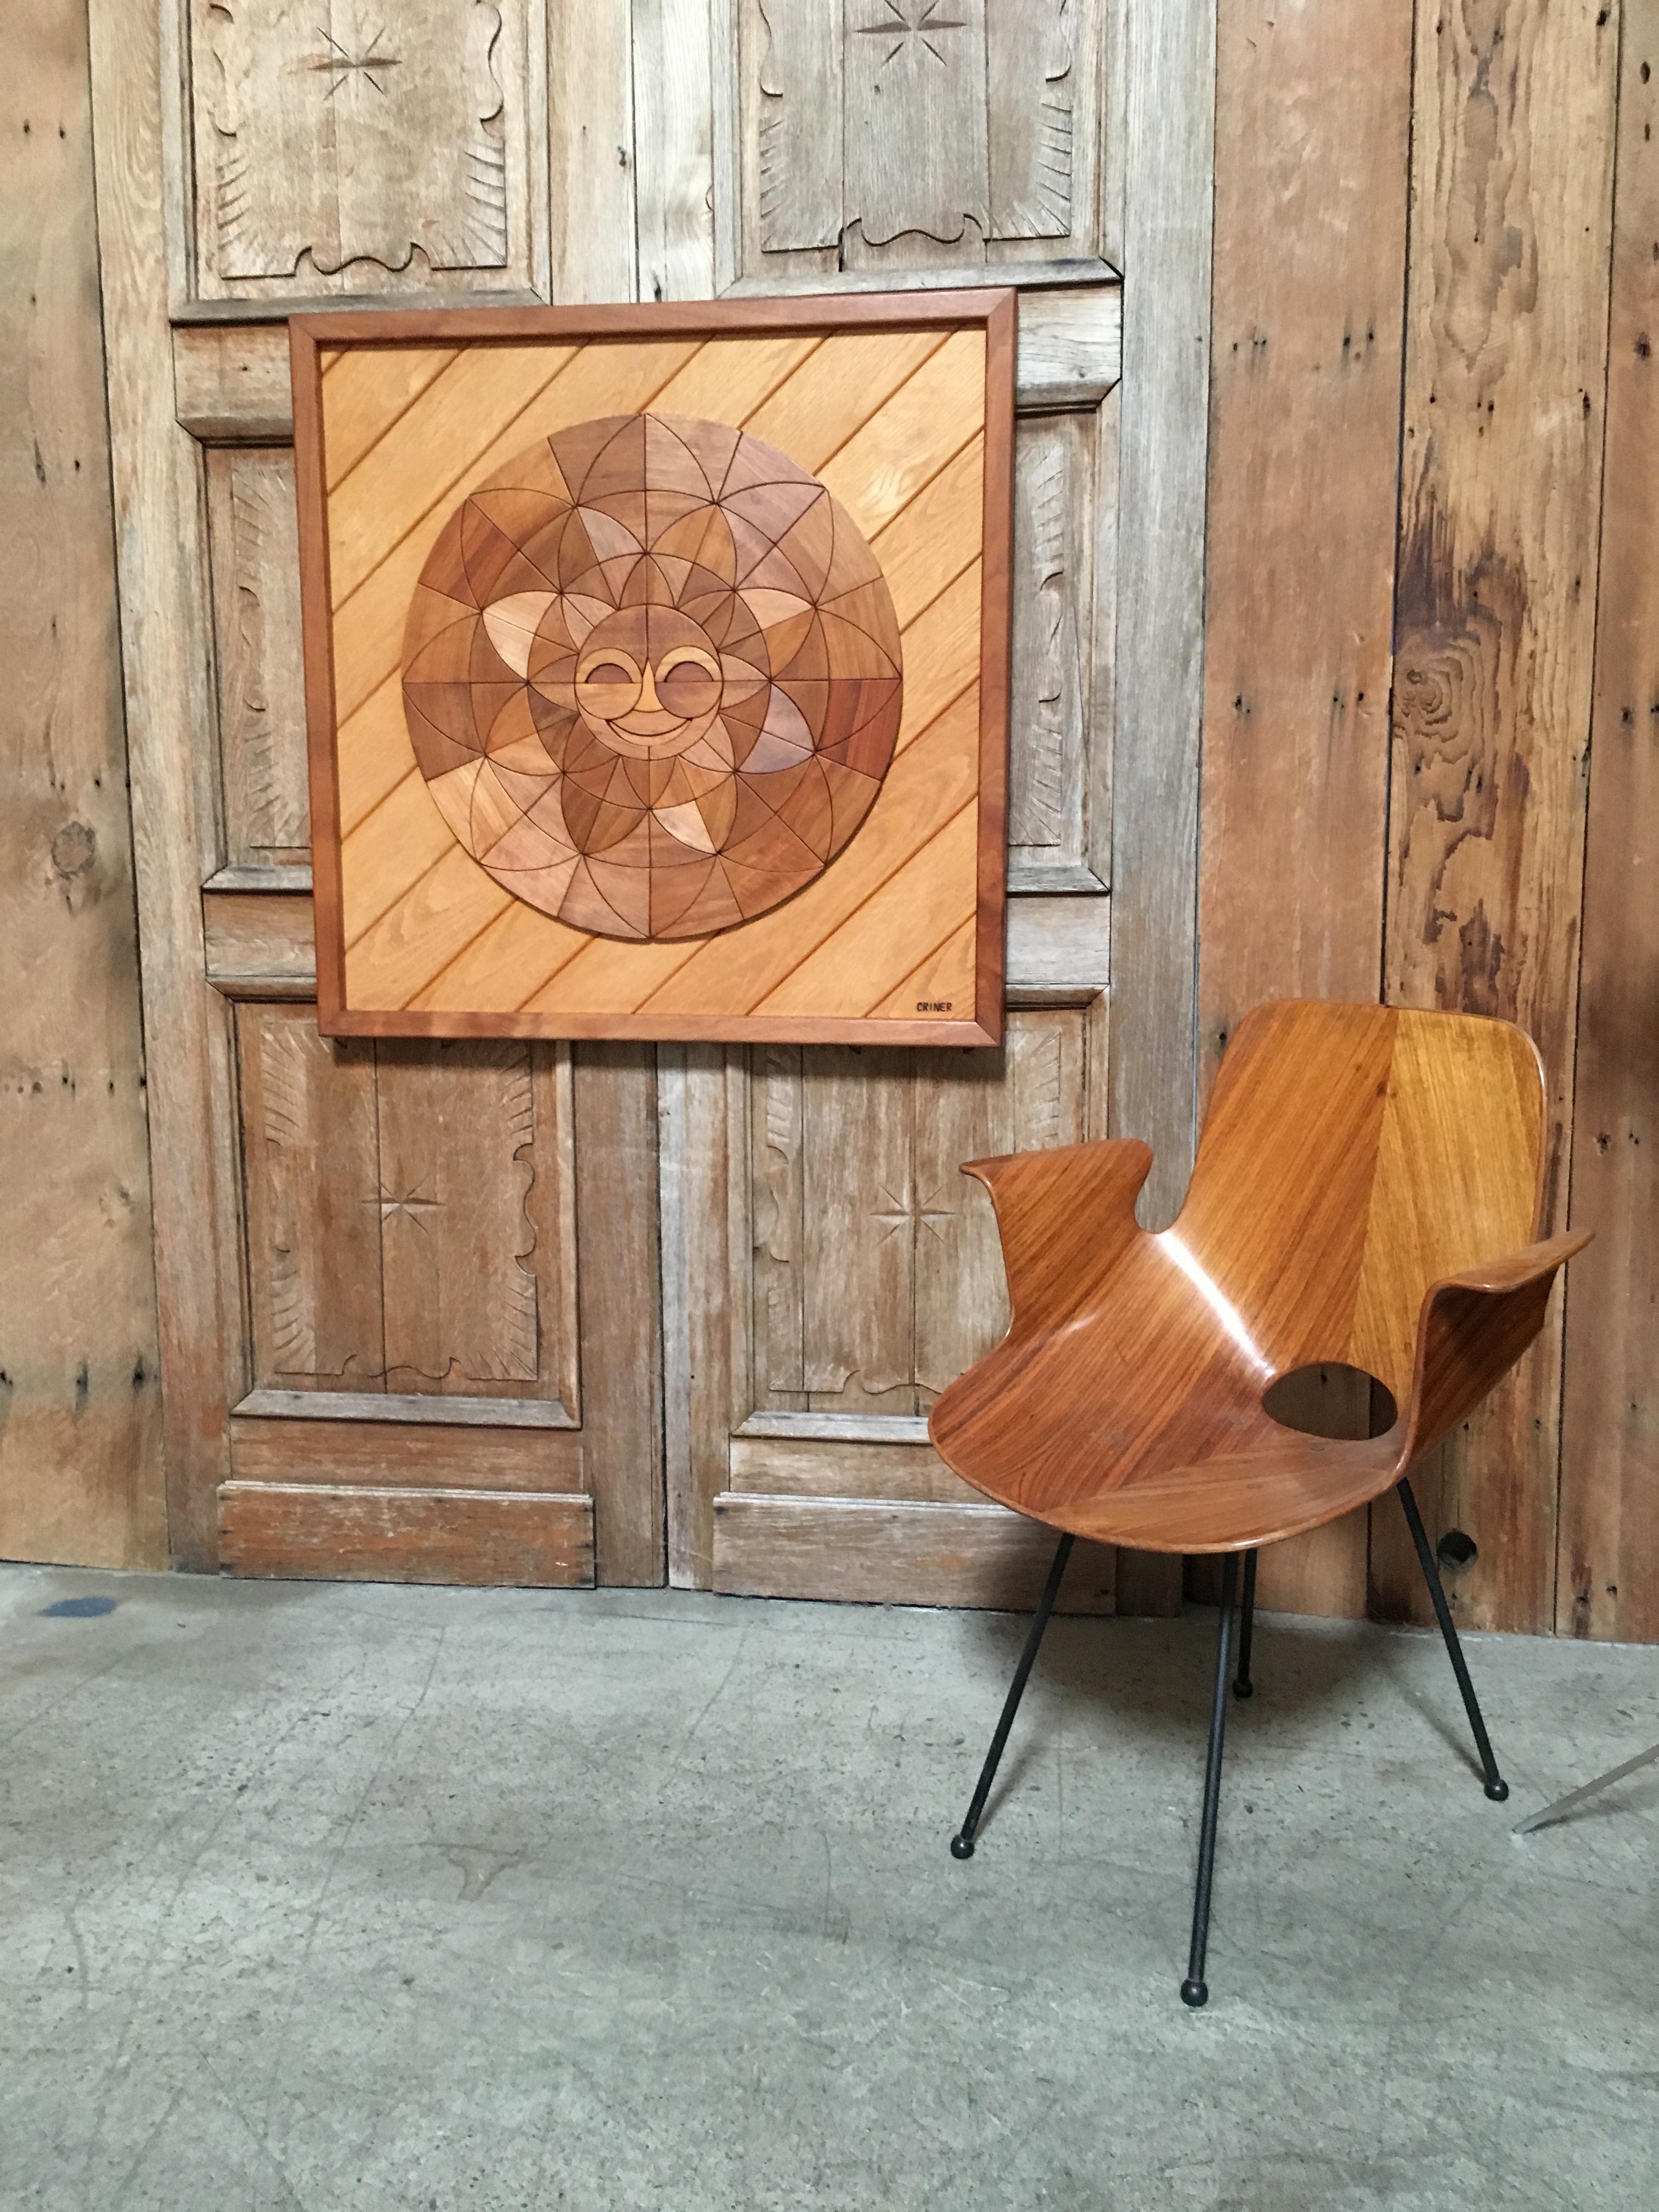 Hand-Crafted Assemblage of Hardwoods by Dave Criner